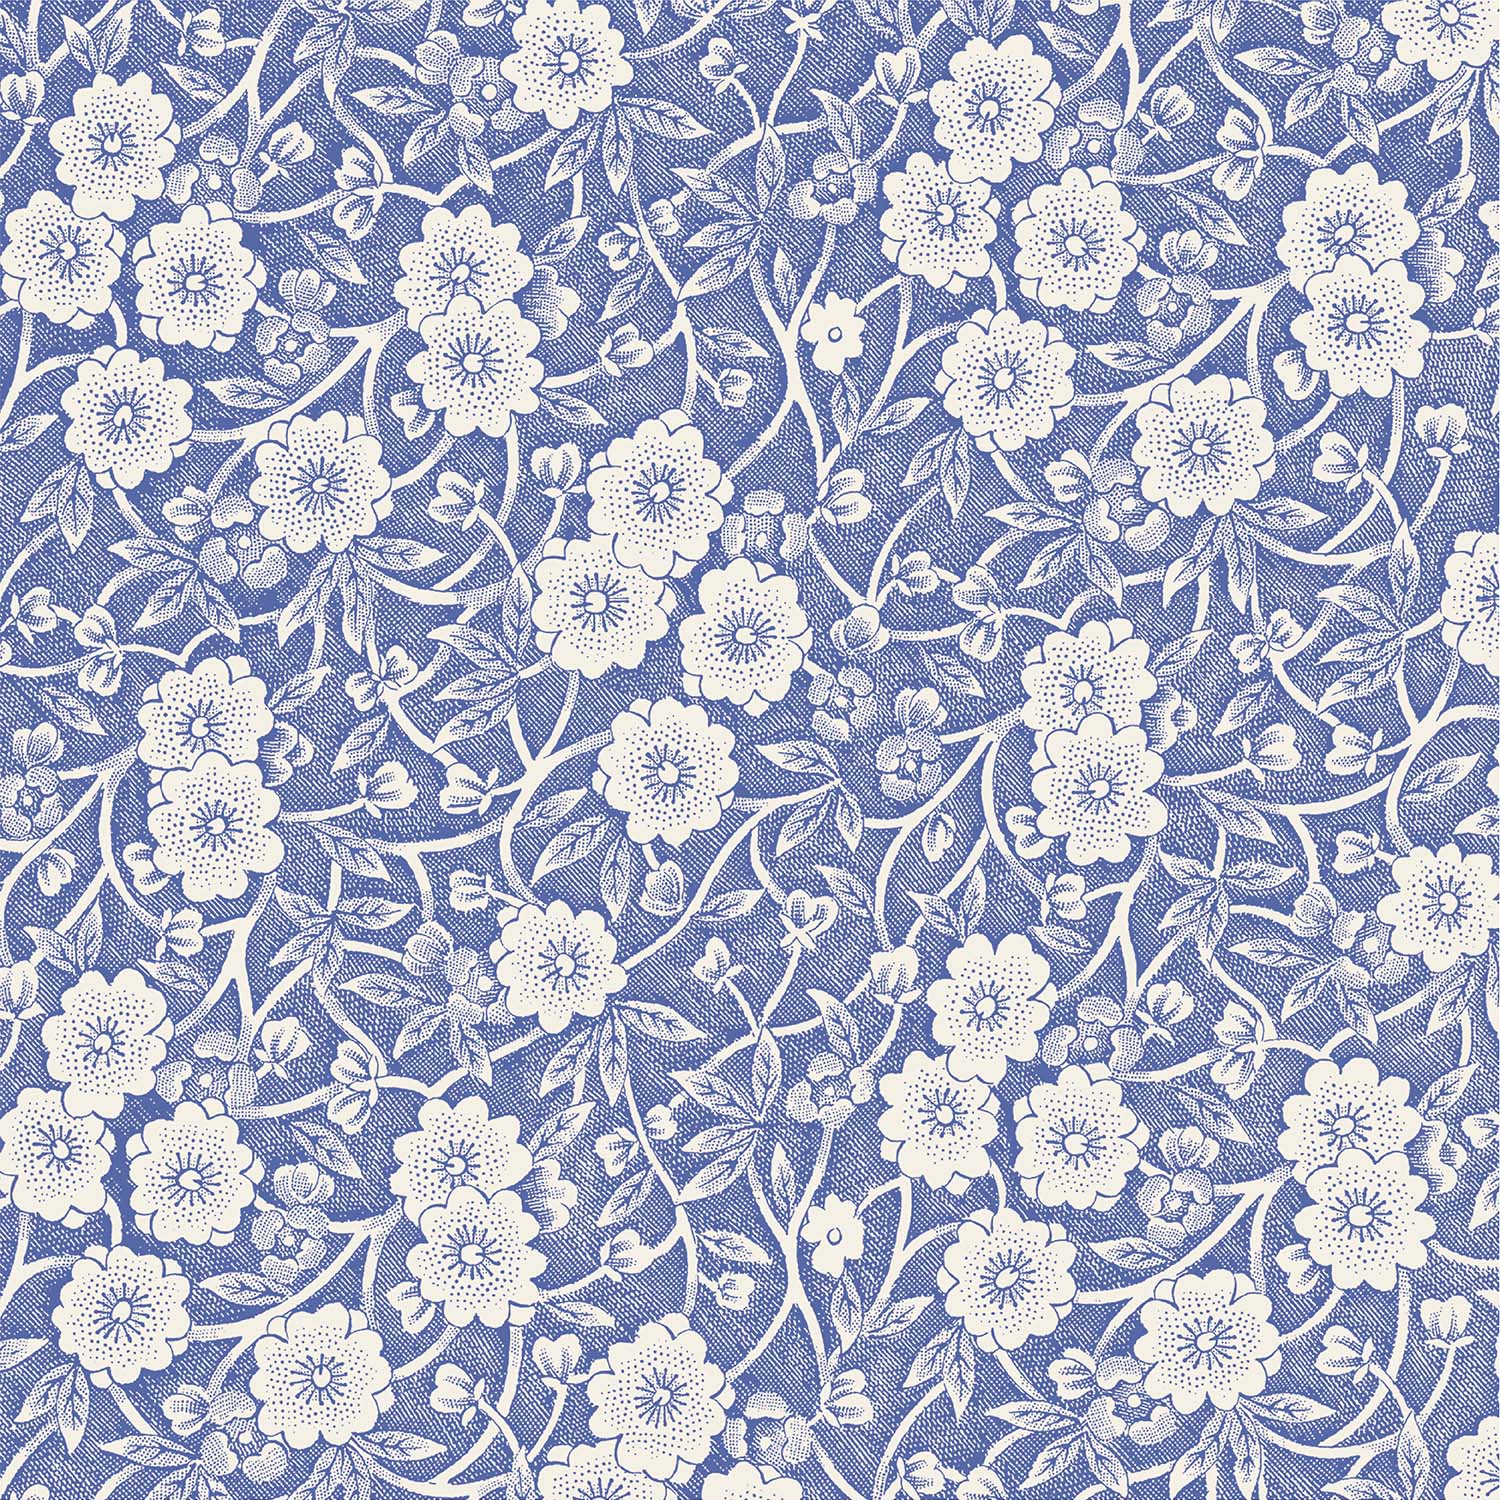 Beautiful Blue Calico Napkins with exquisitely decorated white flowers.